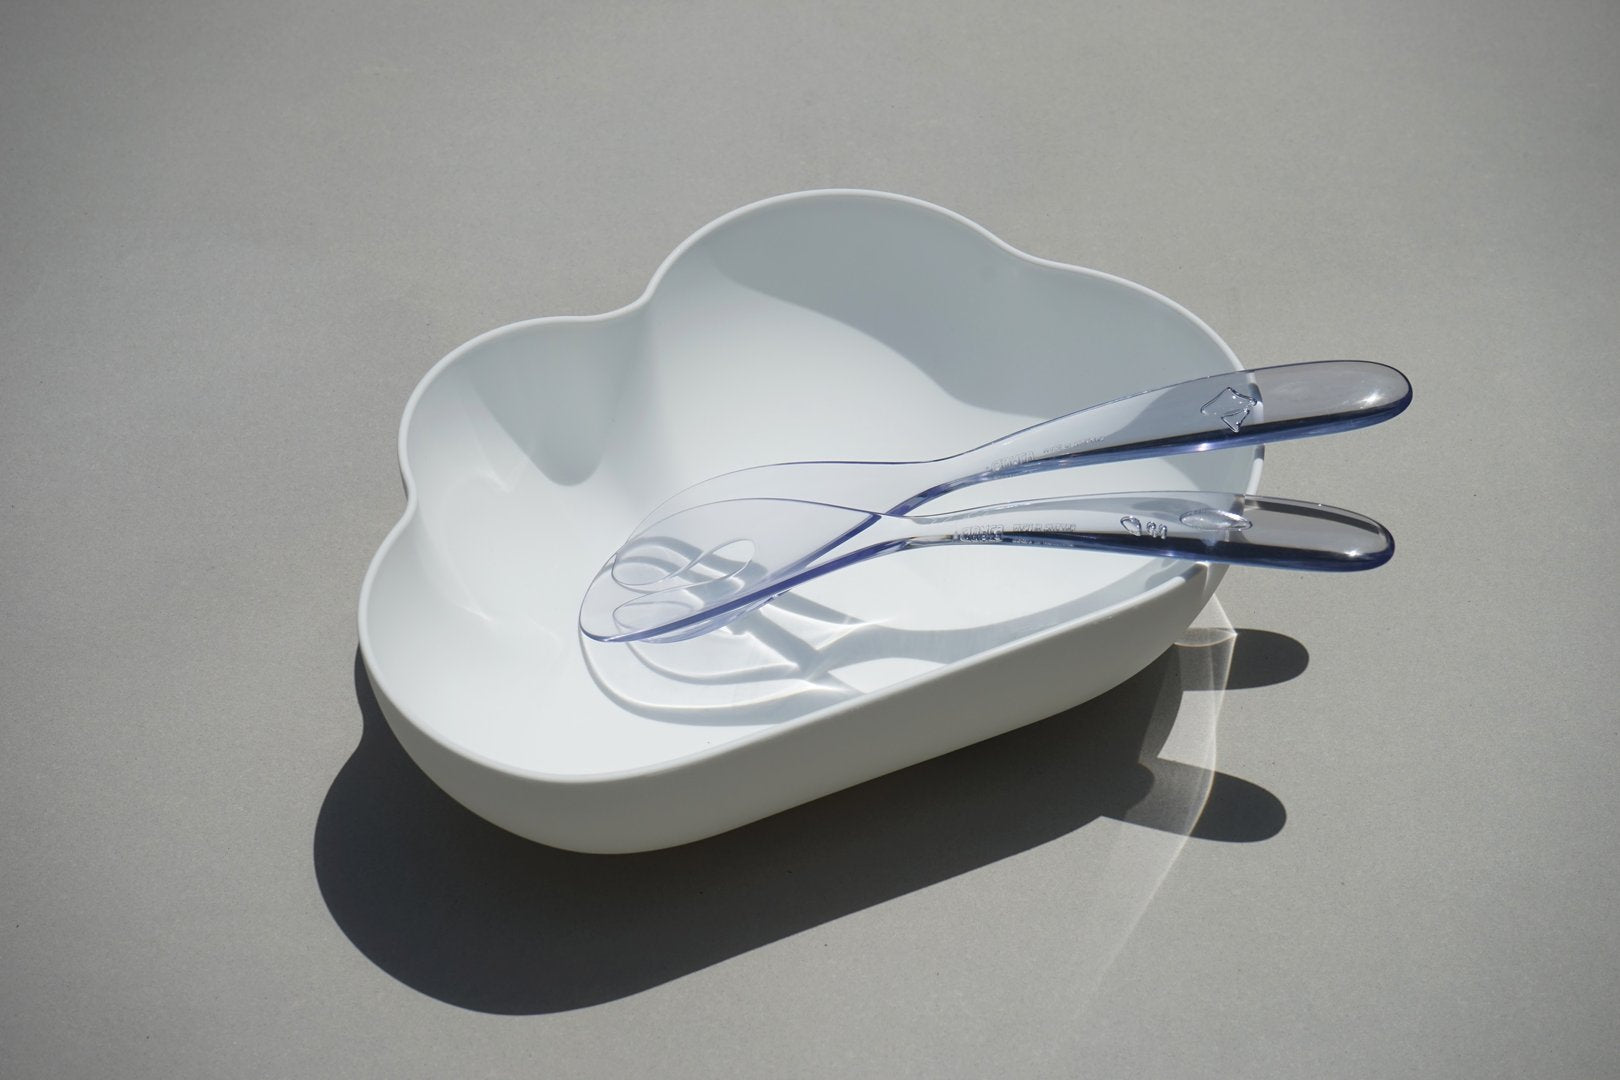 "Cloud" salad bowl from Qualy with salad servers